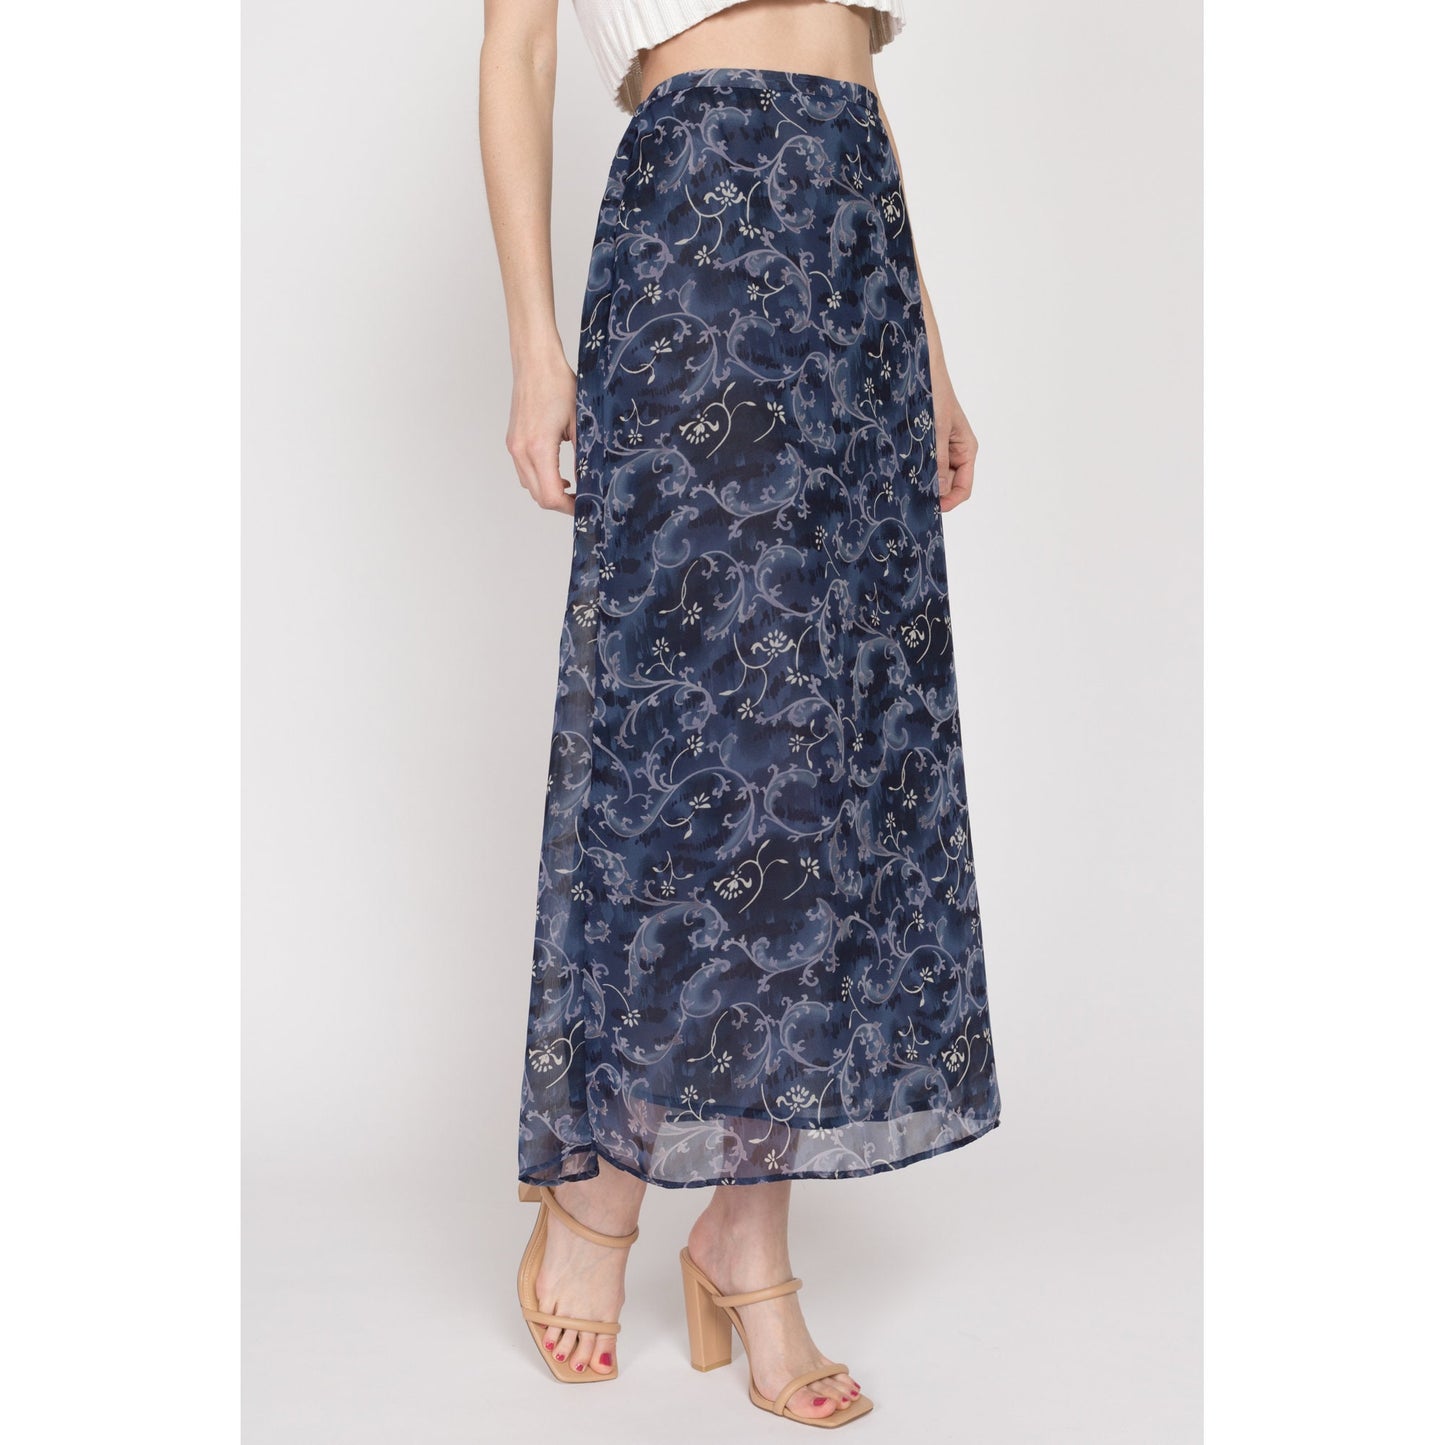 Small 90s Blue Floral Maxi Skirt | Vintage Grunge High Waisted Ankle Length Skirt